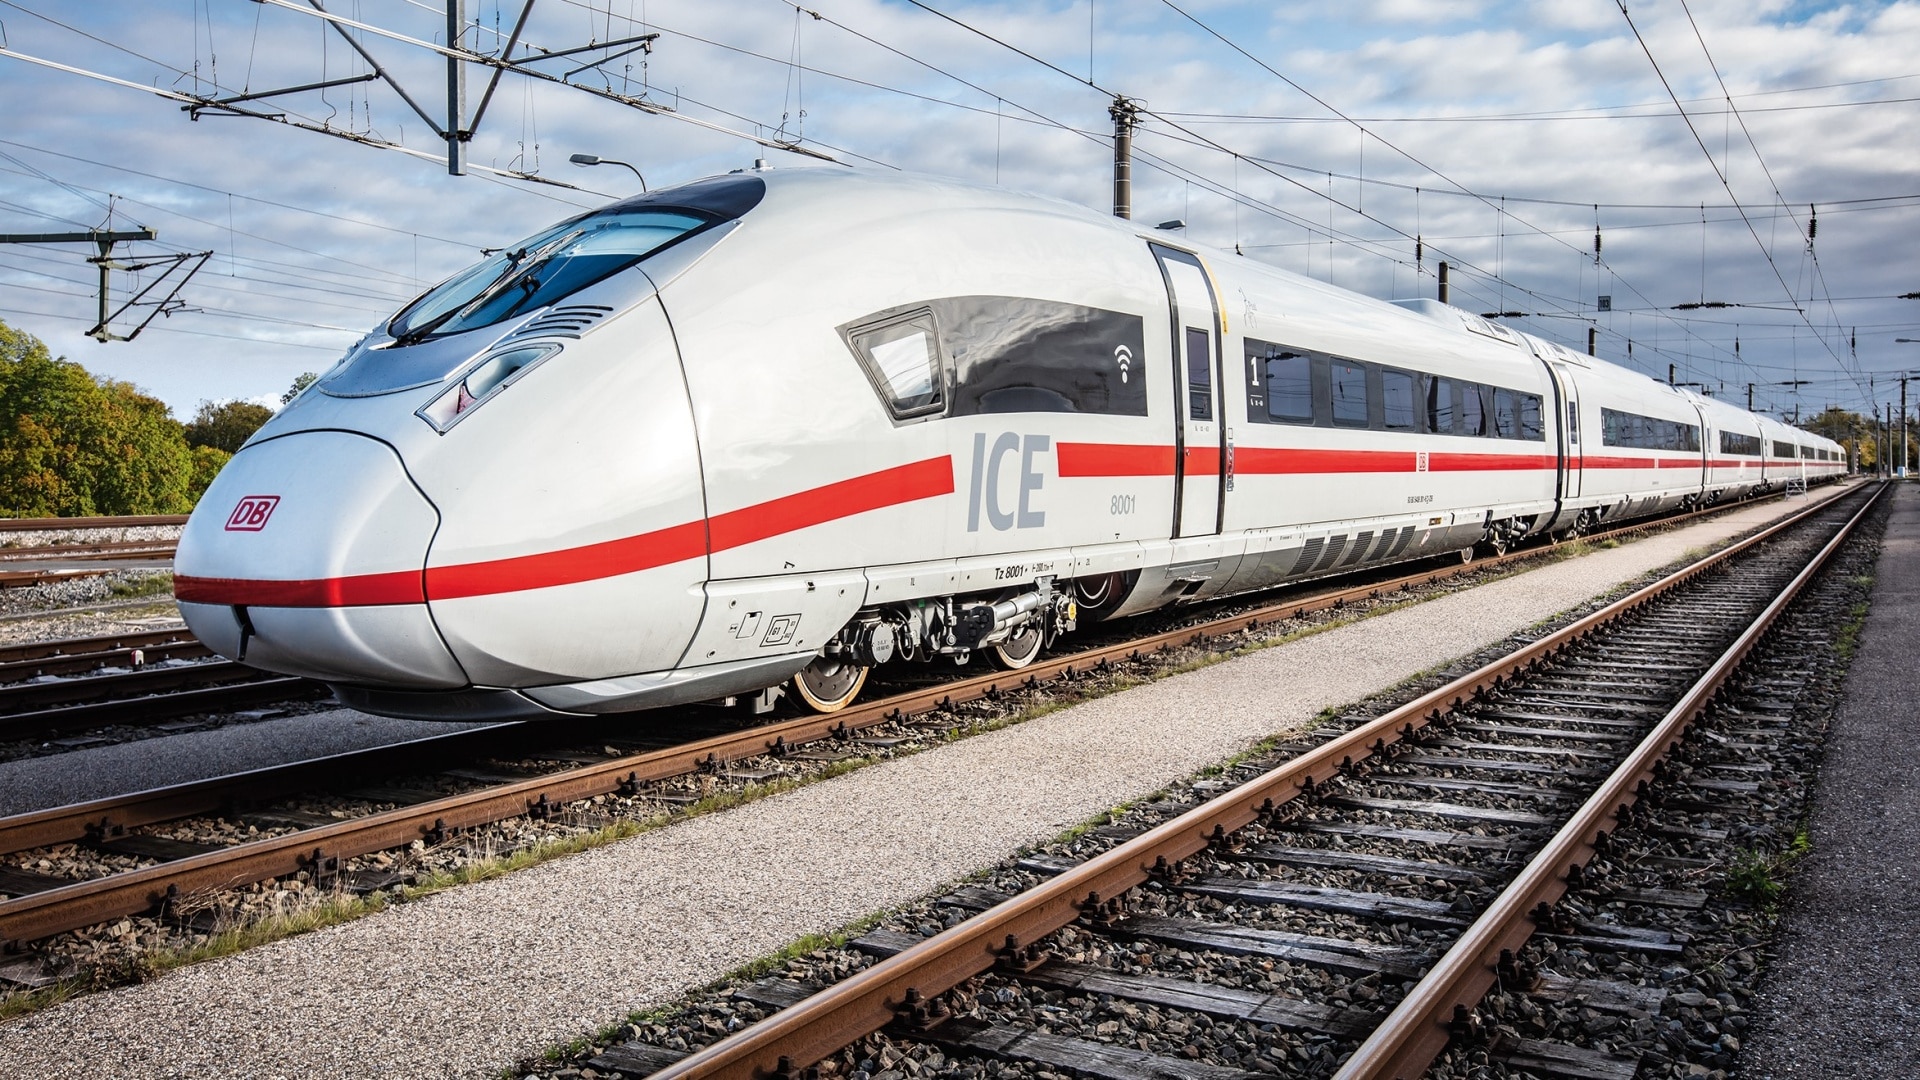 Knorr-Bremse will equip 43 additional ICE trains with components